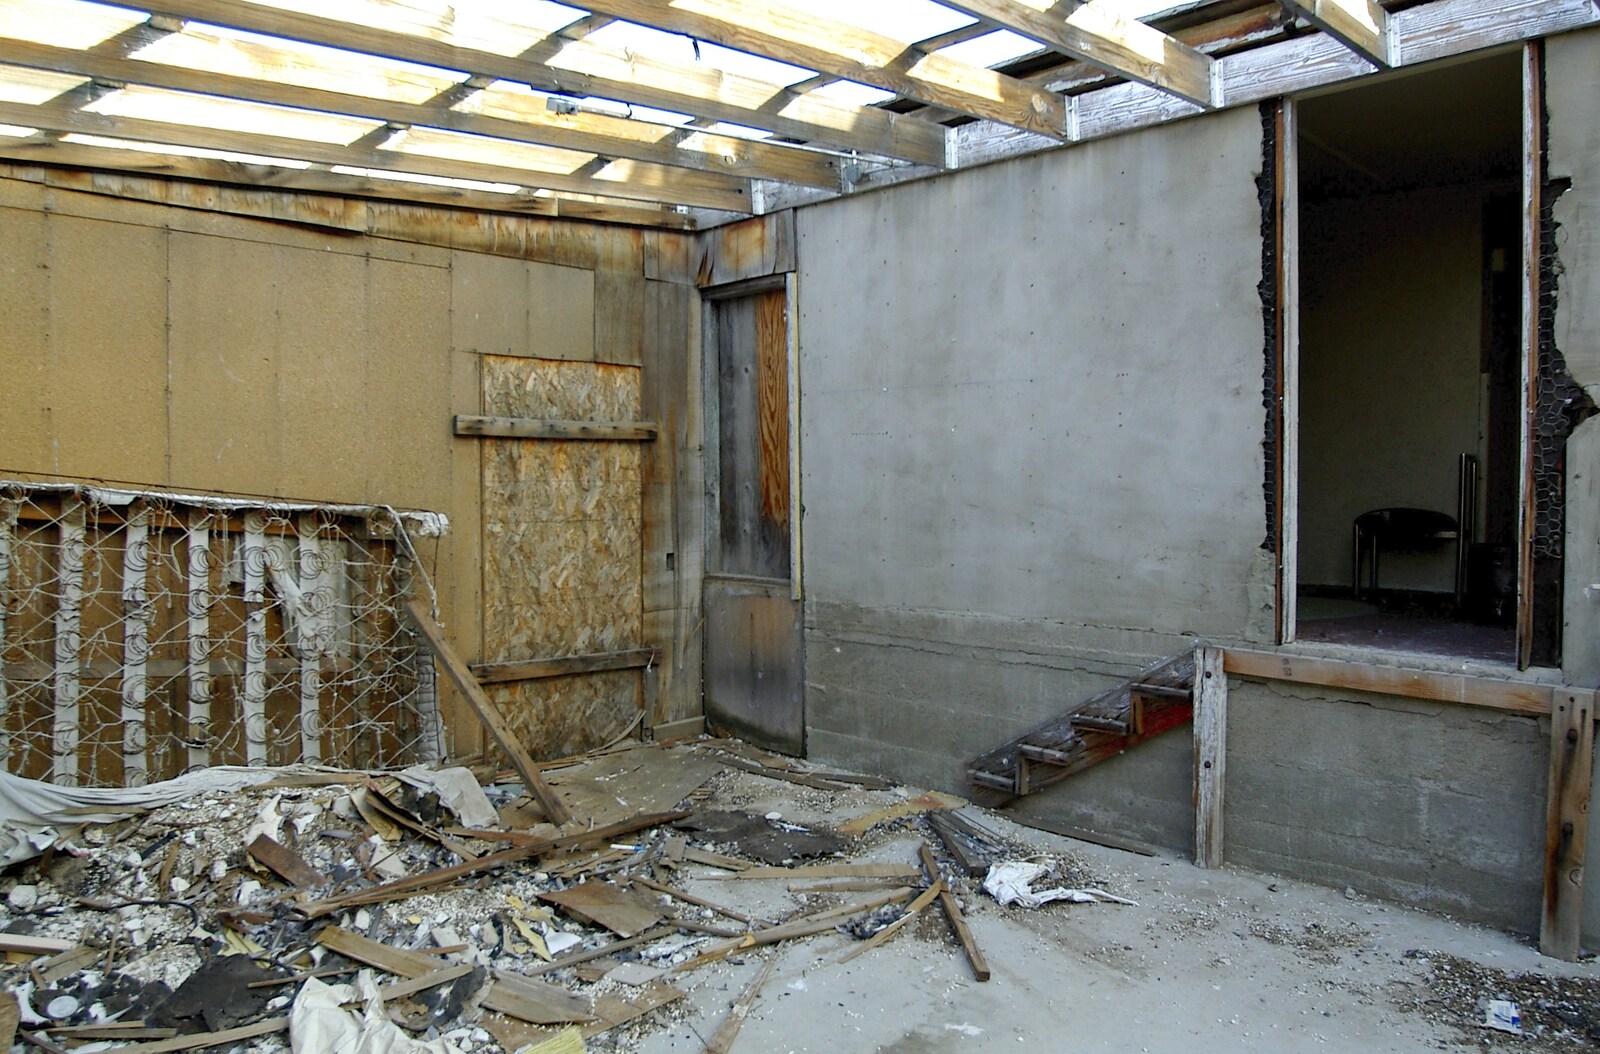 Inside the derelict building from Mojave Desert: San Diego to Joshua Tree and Twentynine Palms, California, US - 5th March 2006